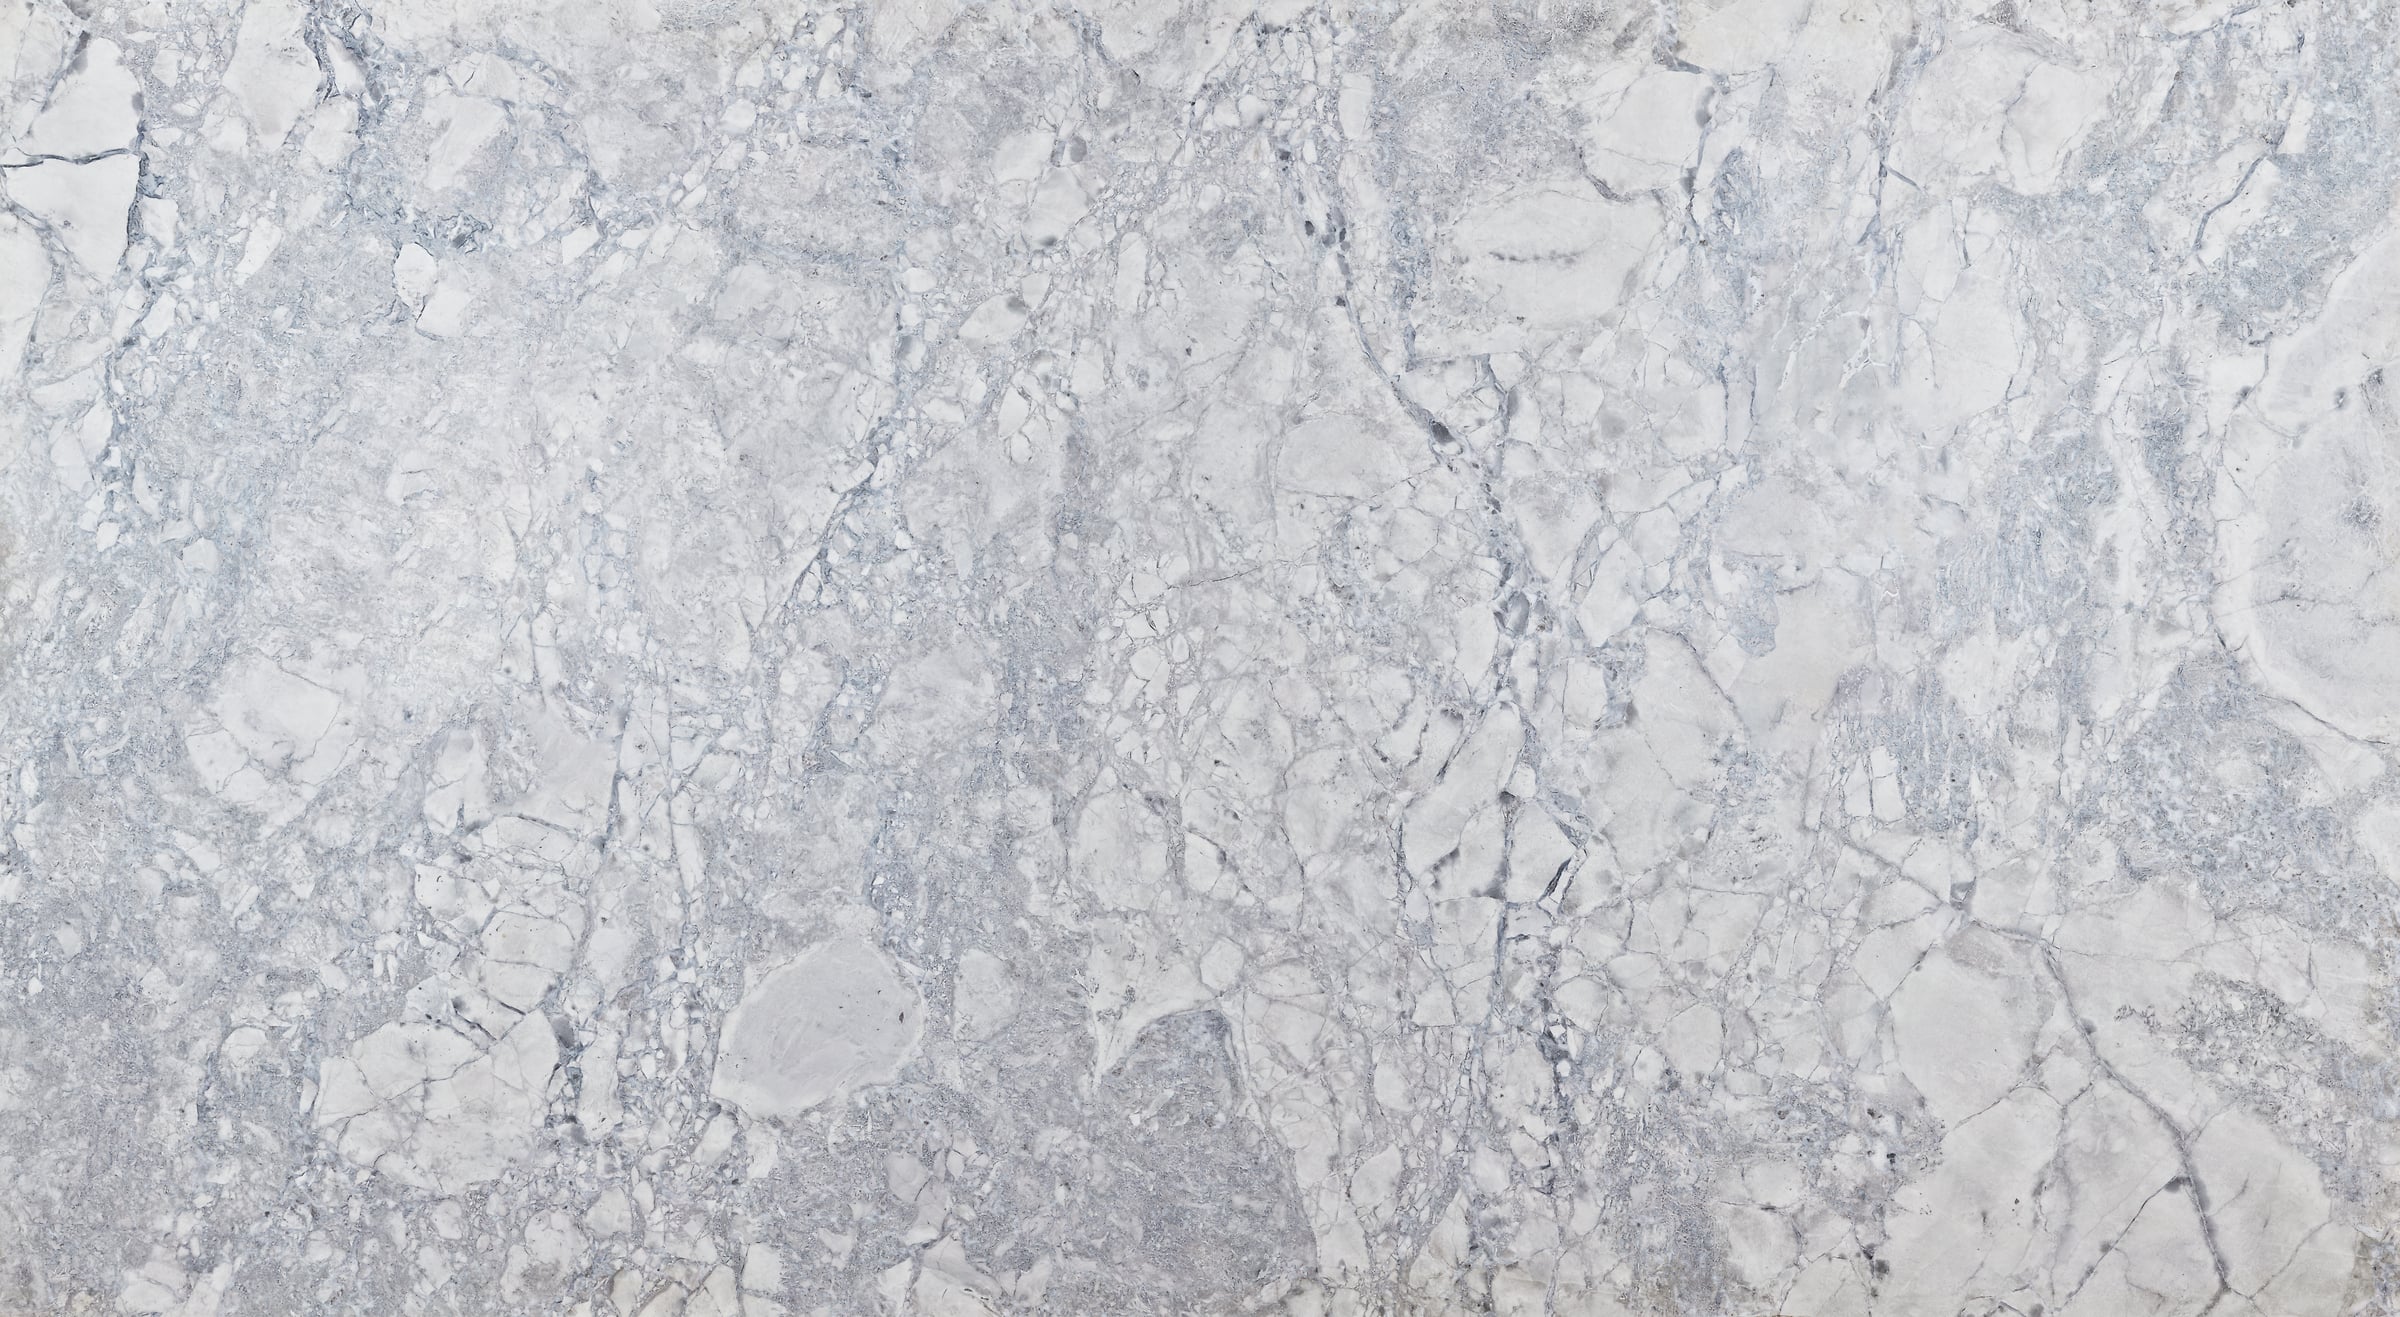 1,120 megapixels! An ultra-high-resolution texture photo file of bianco eclipsia quatzite stone; gigapixel photograph created by David Lineton.